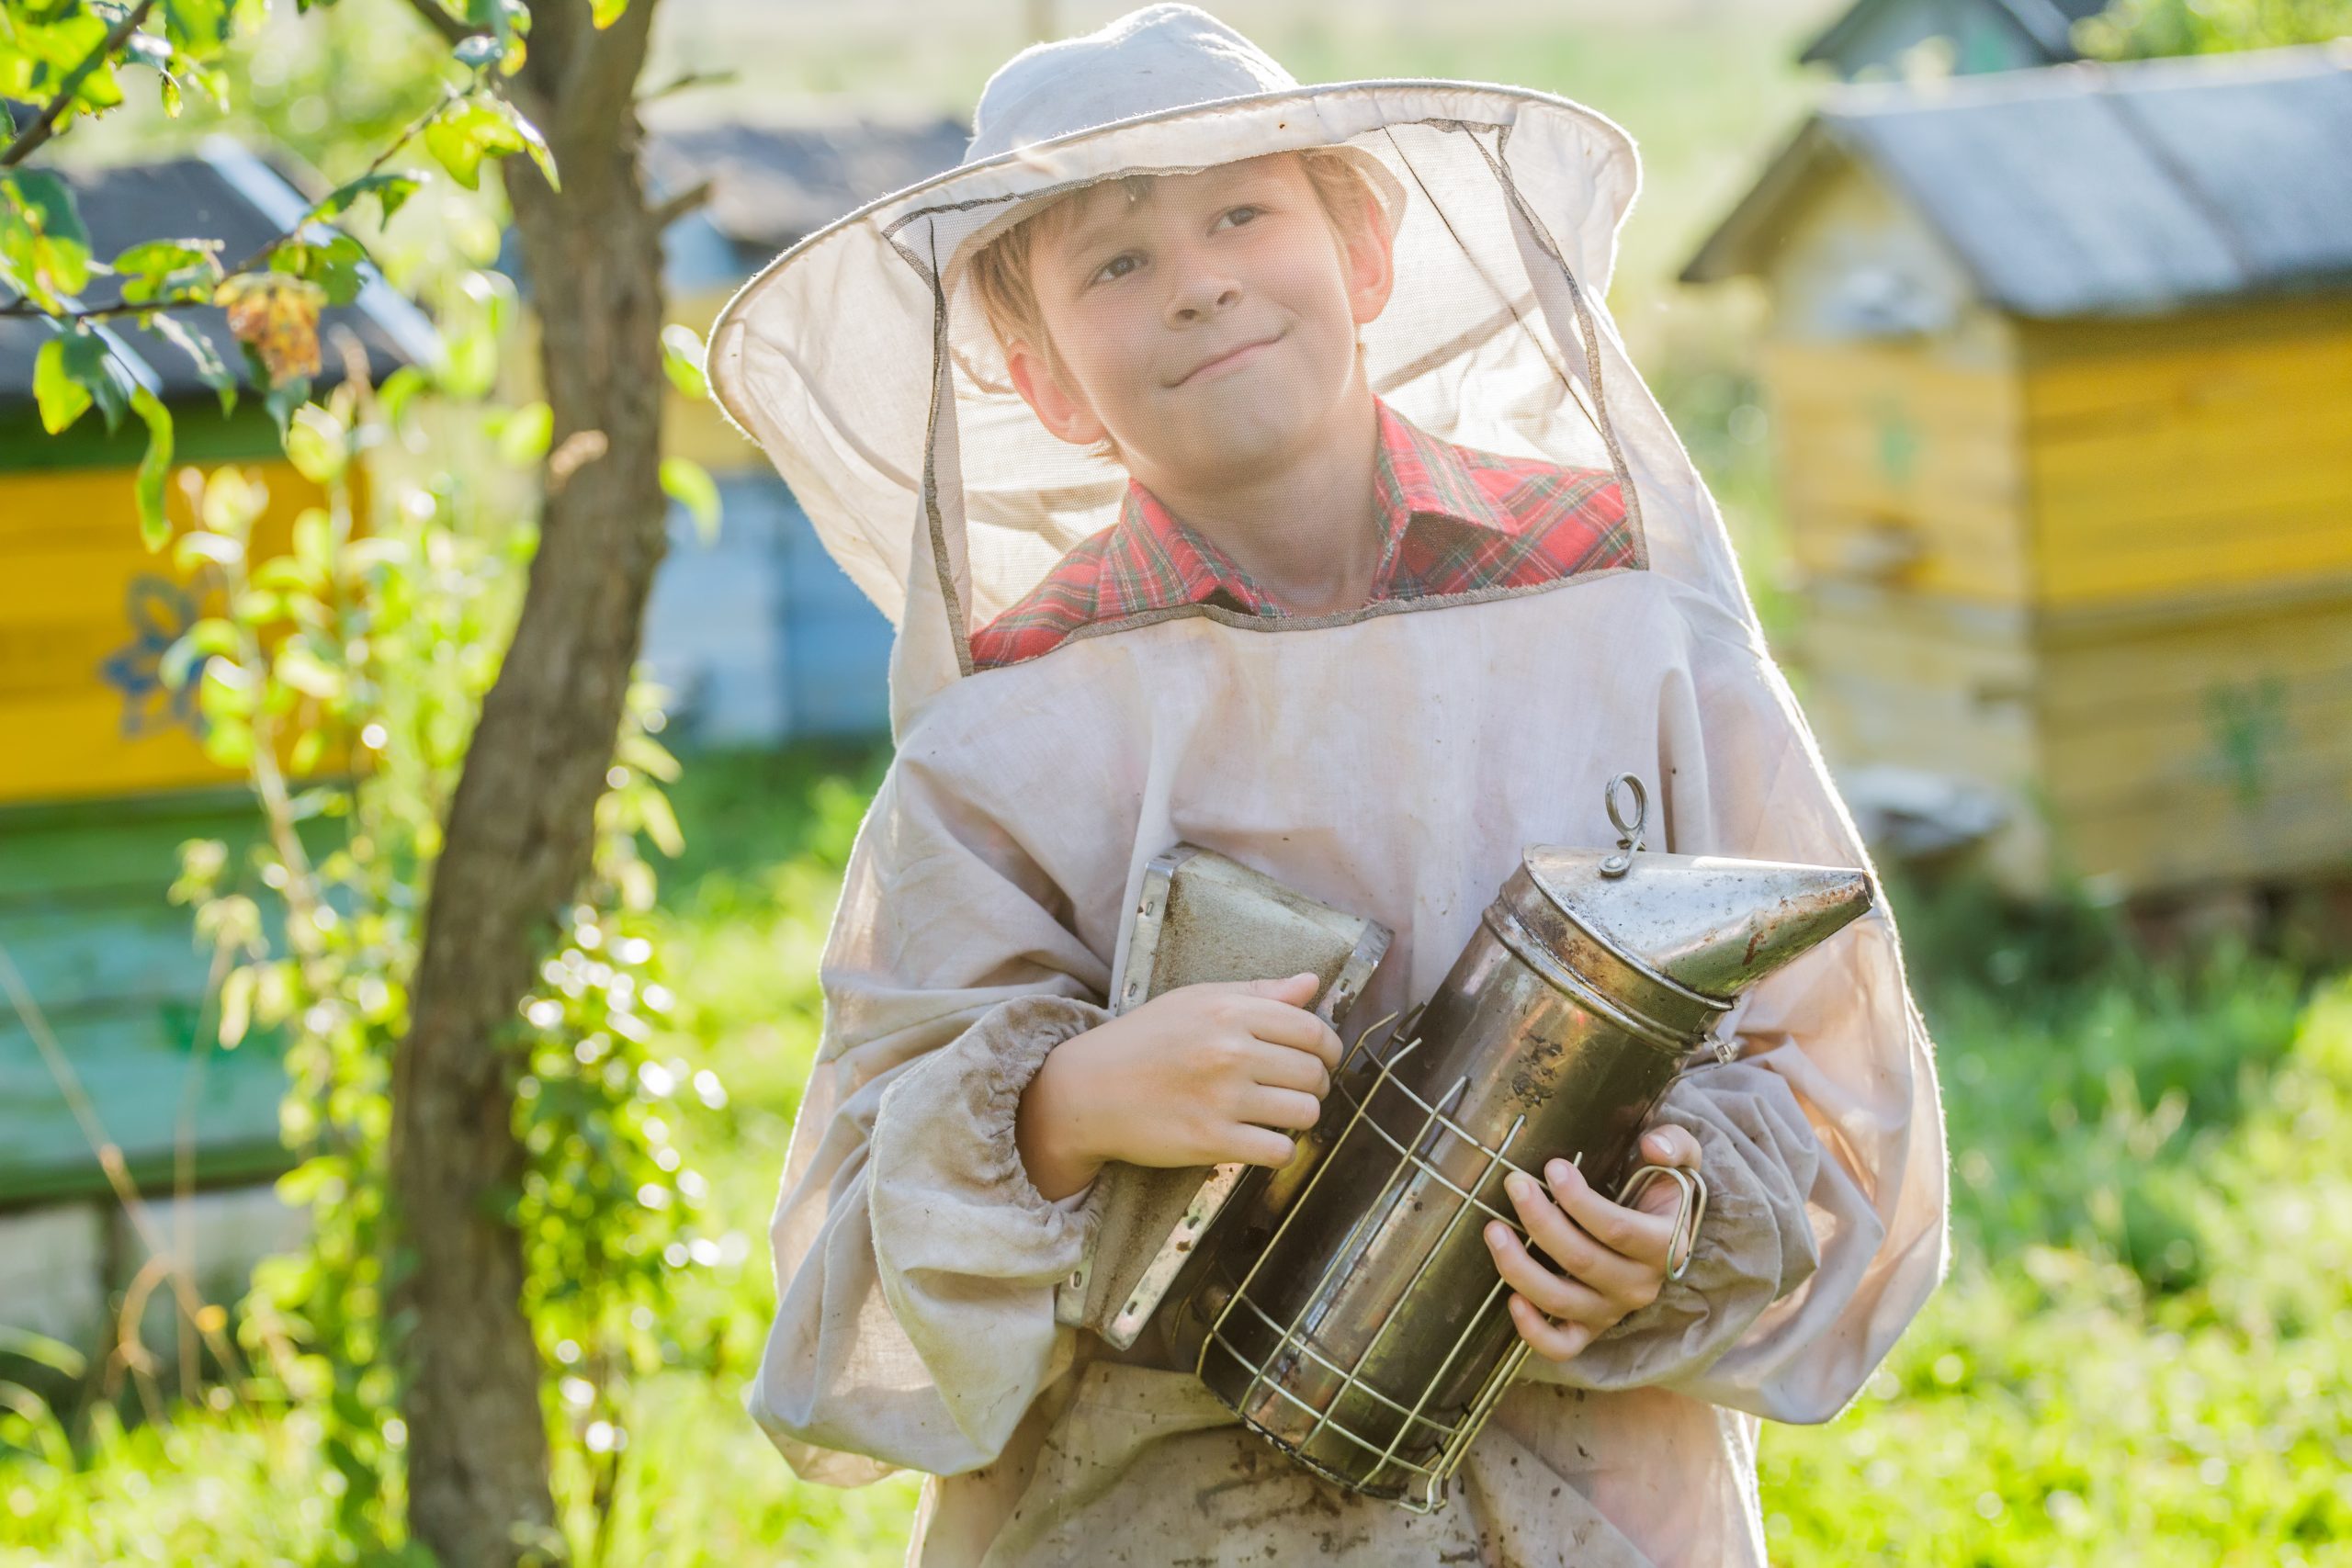 Young Florida Beekeeper Invited to the White House